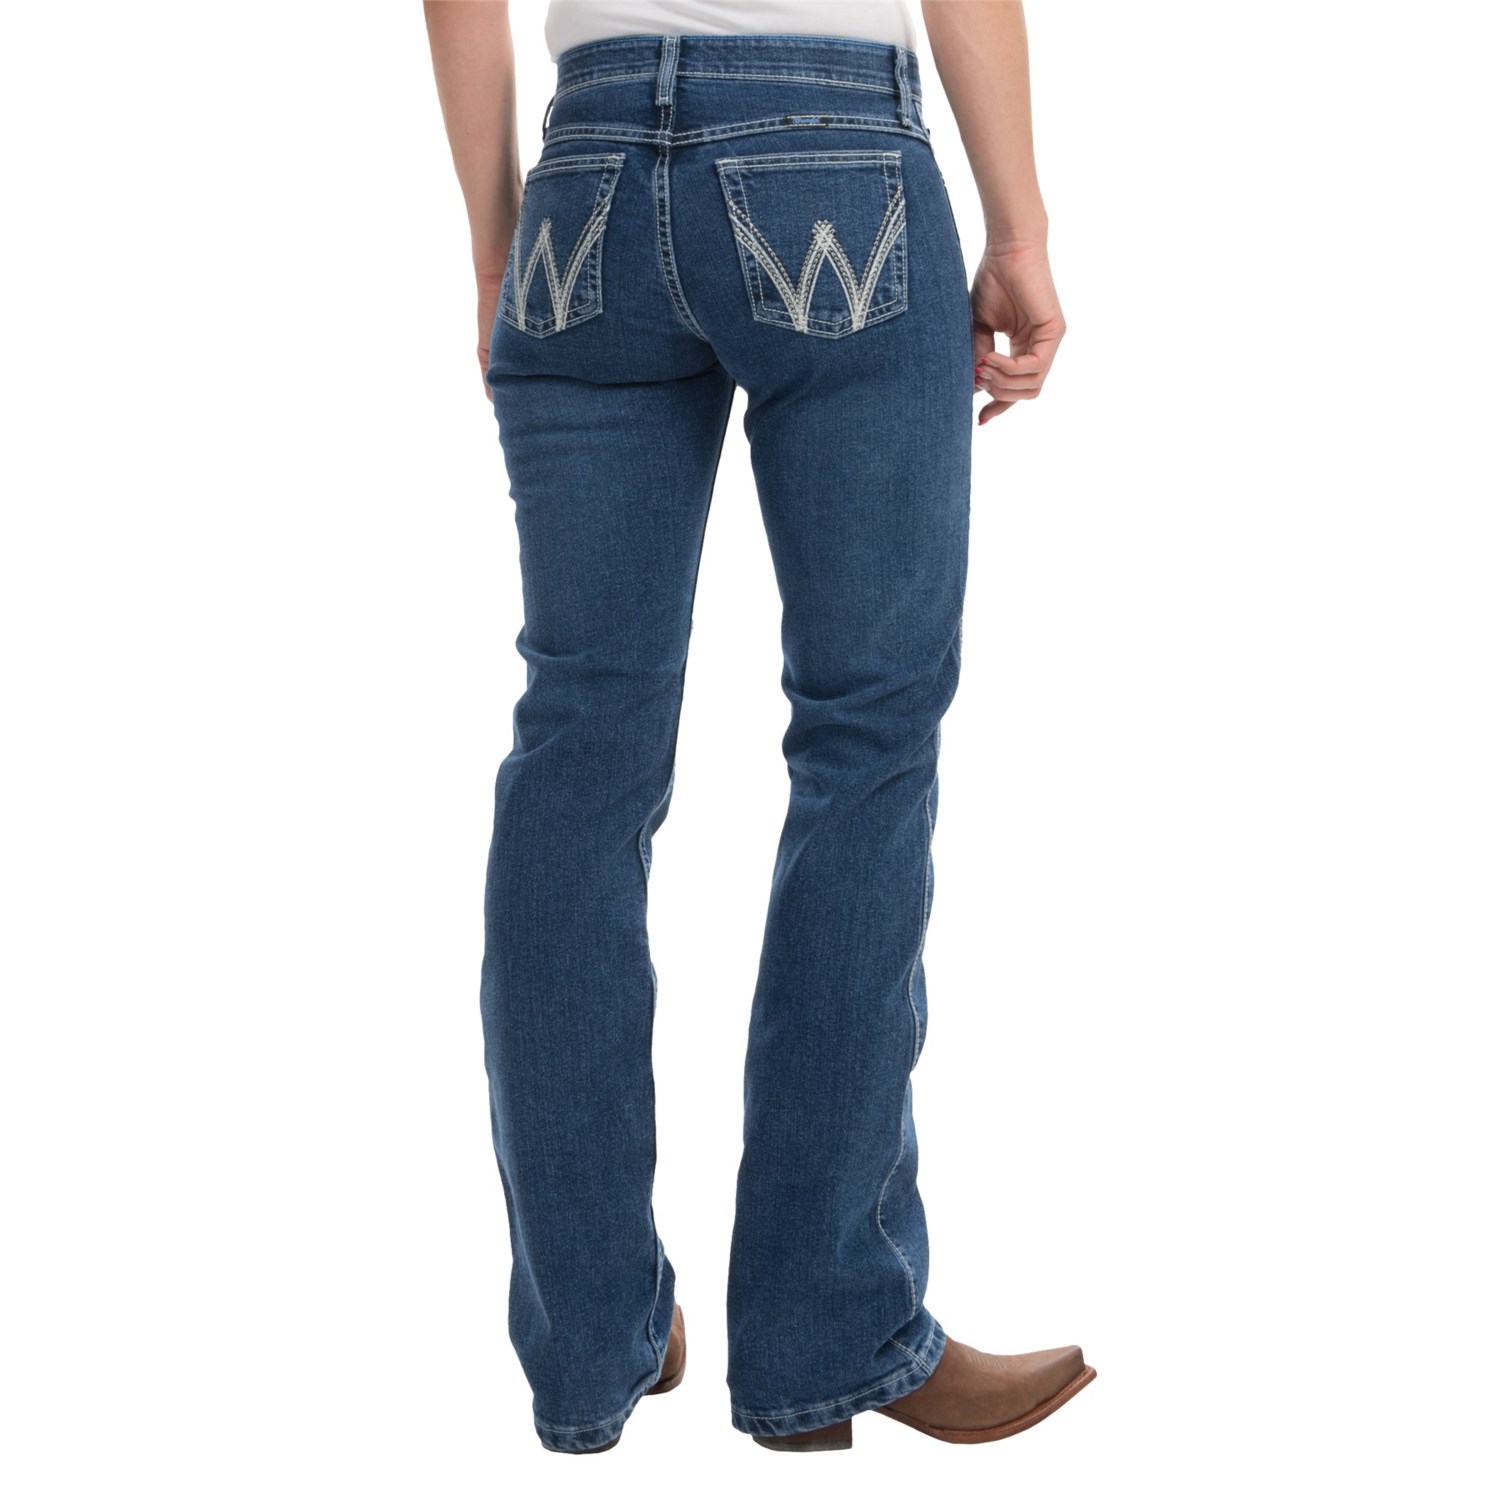 Wrangler Cool Vantage Q-Baby Jeans (For Women) - Save 50%